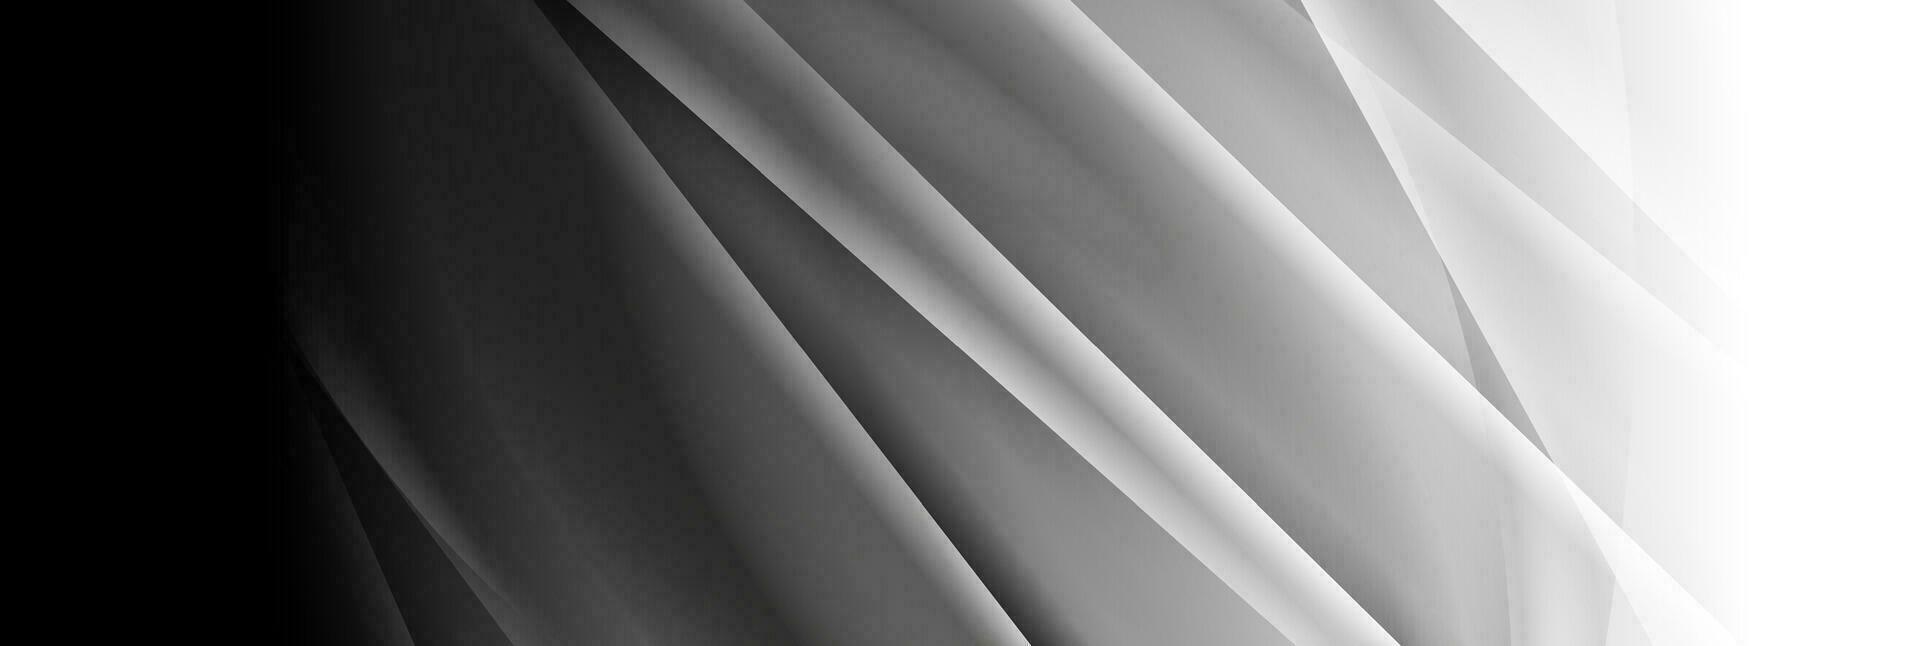 Black and white glossy stripes and waves abstract background vector